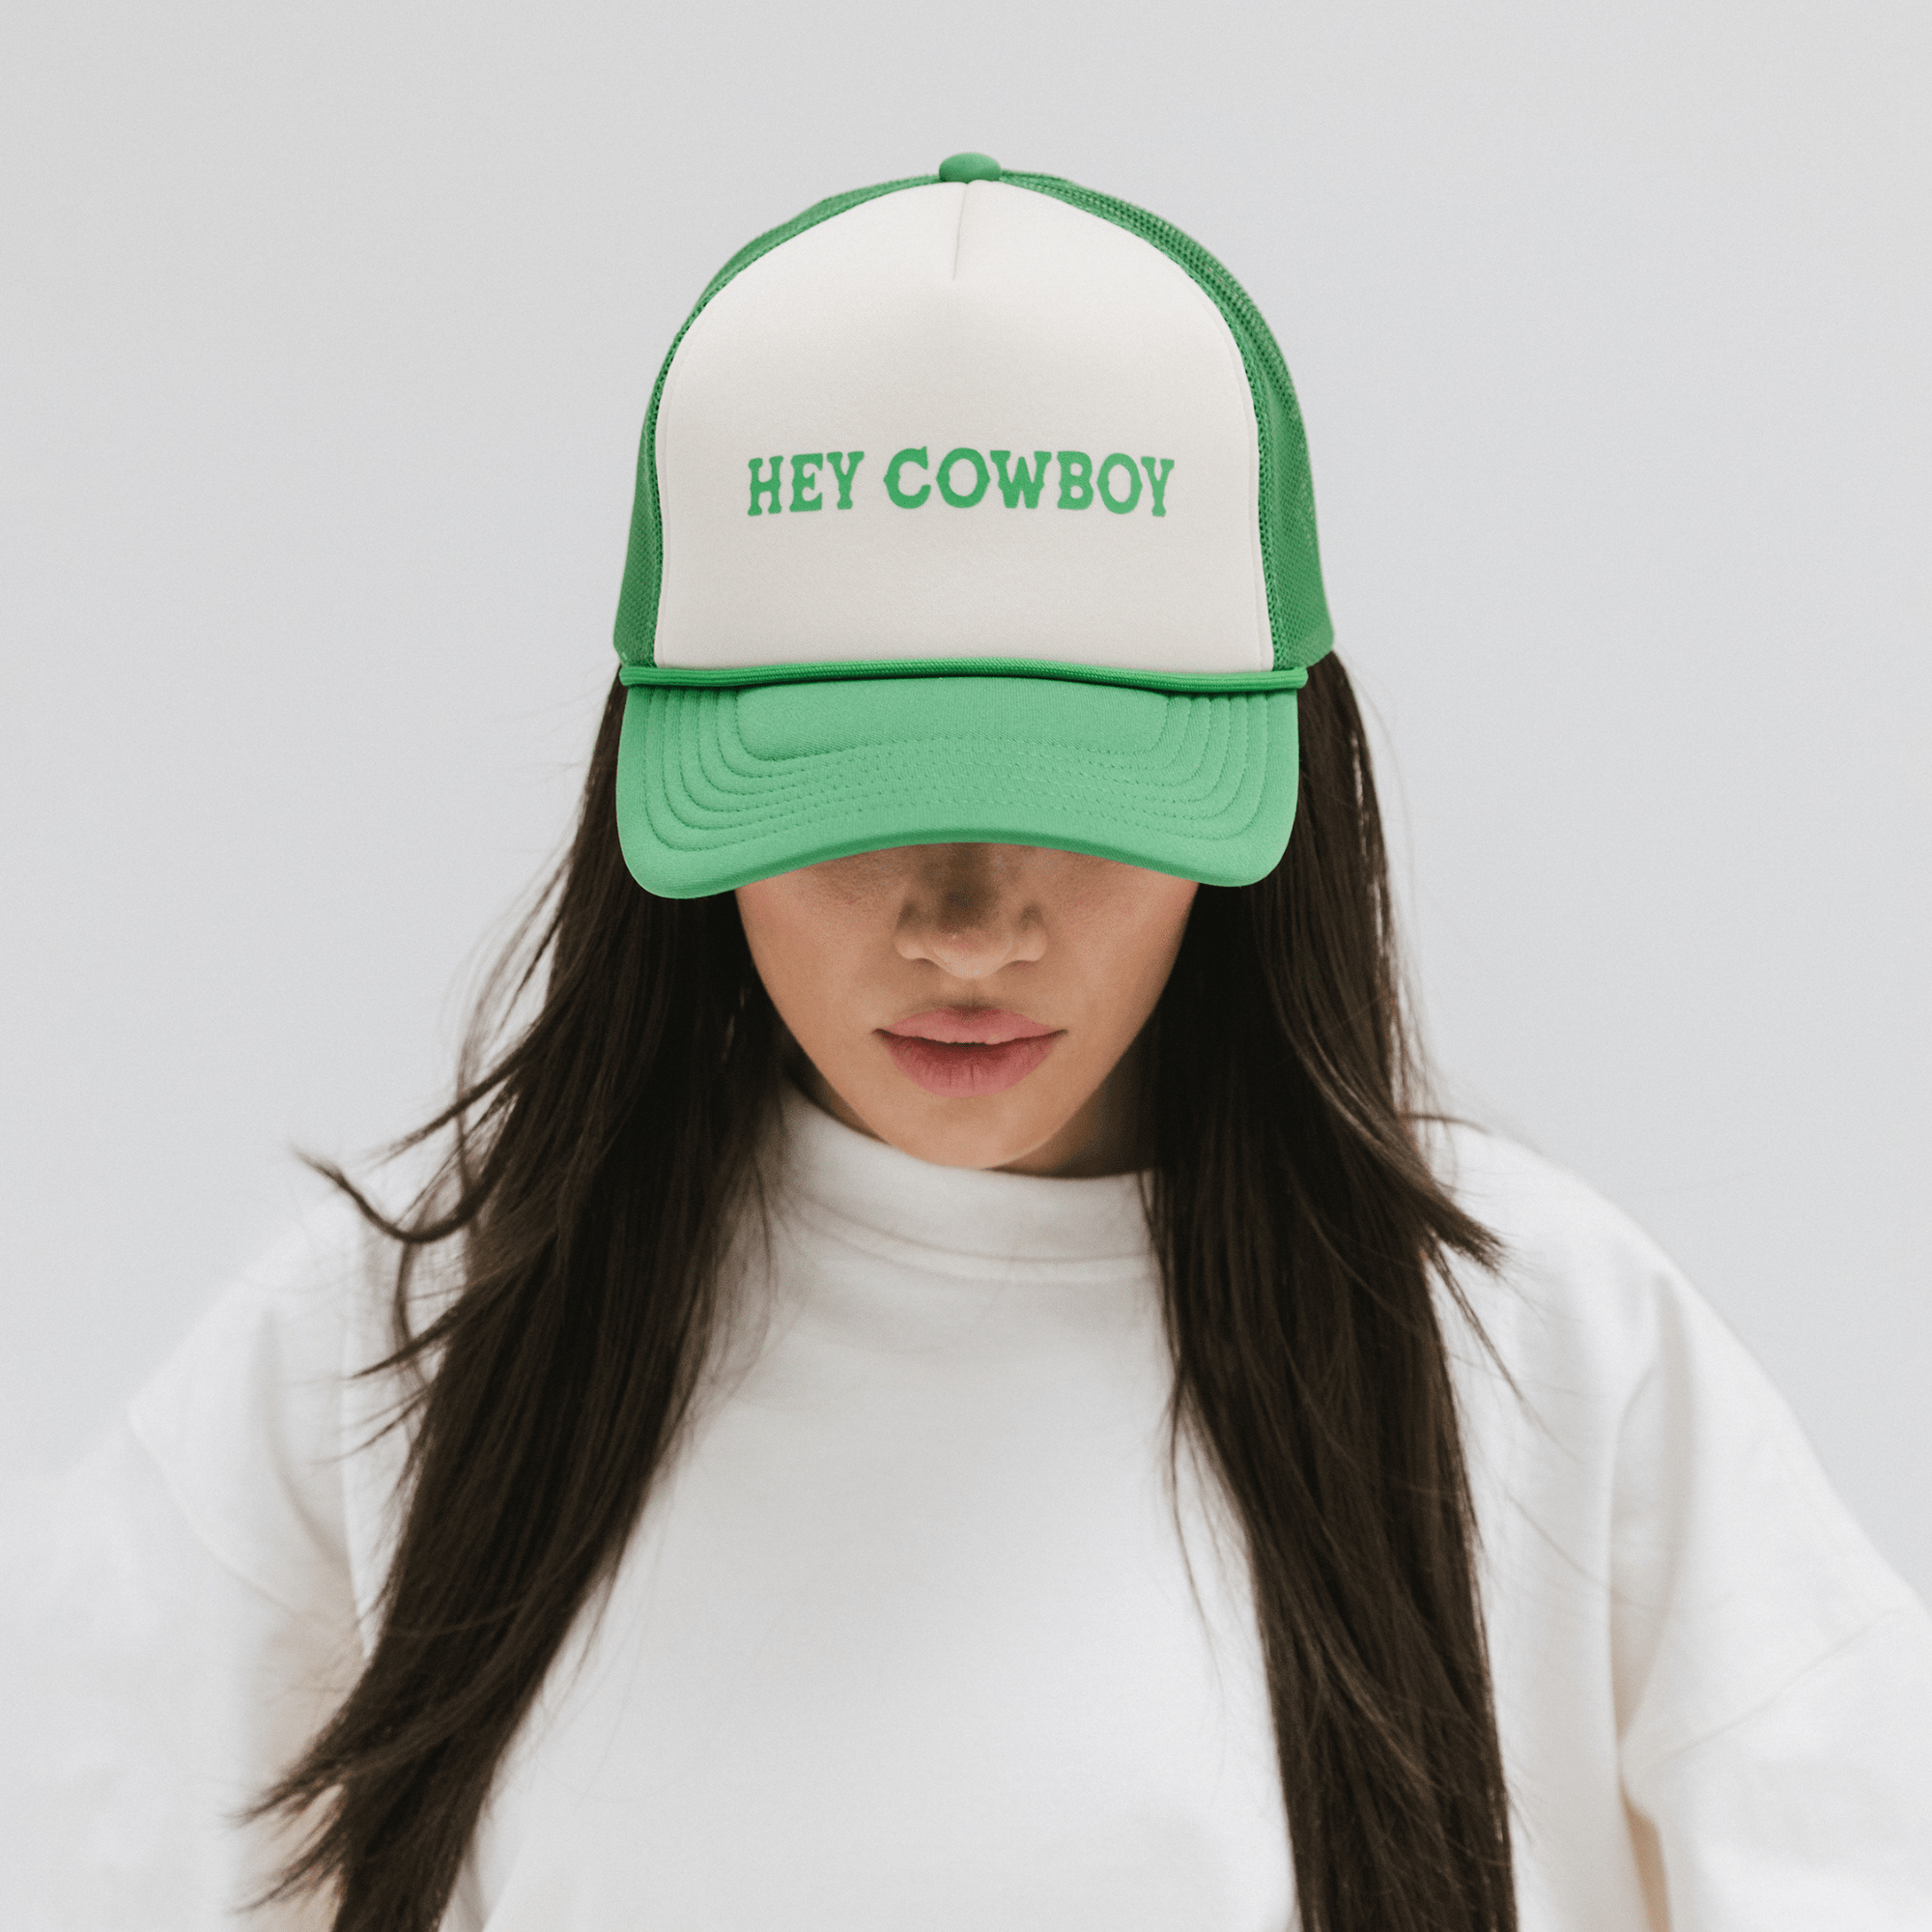 Gigi Pip trucker hats for women - Hey Cowboy Foam Trucker Hat - 100% polyester foam + mesh trucker hat with a curved brim featuring the words 